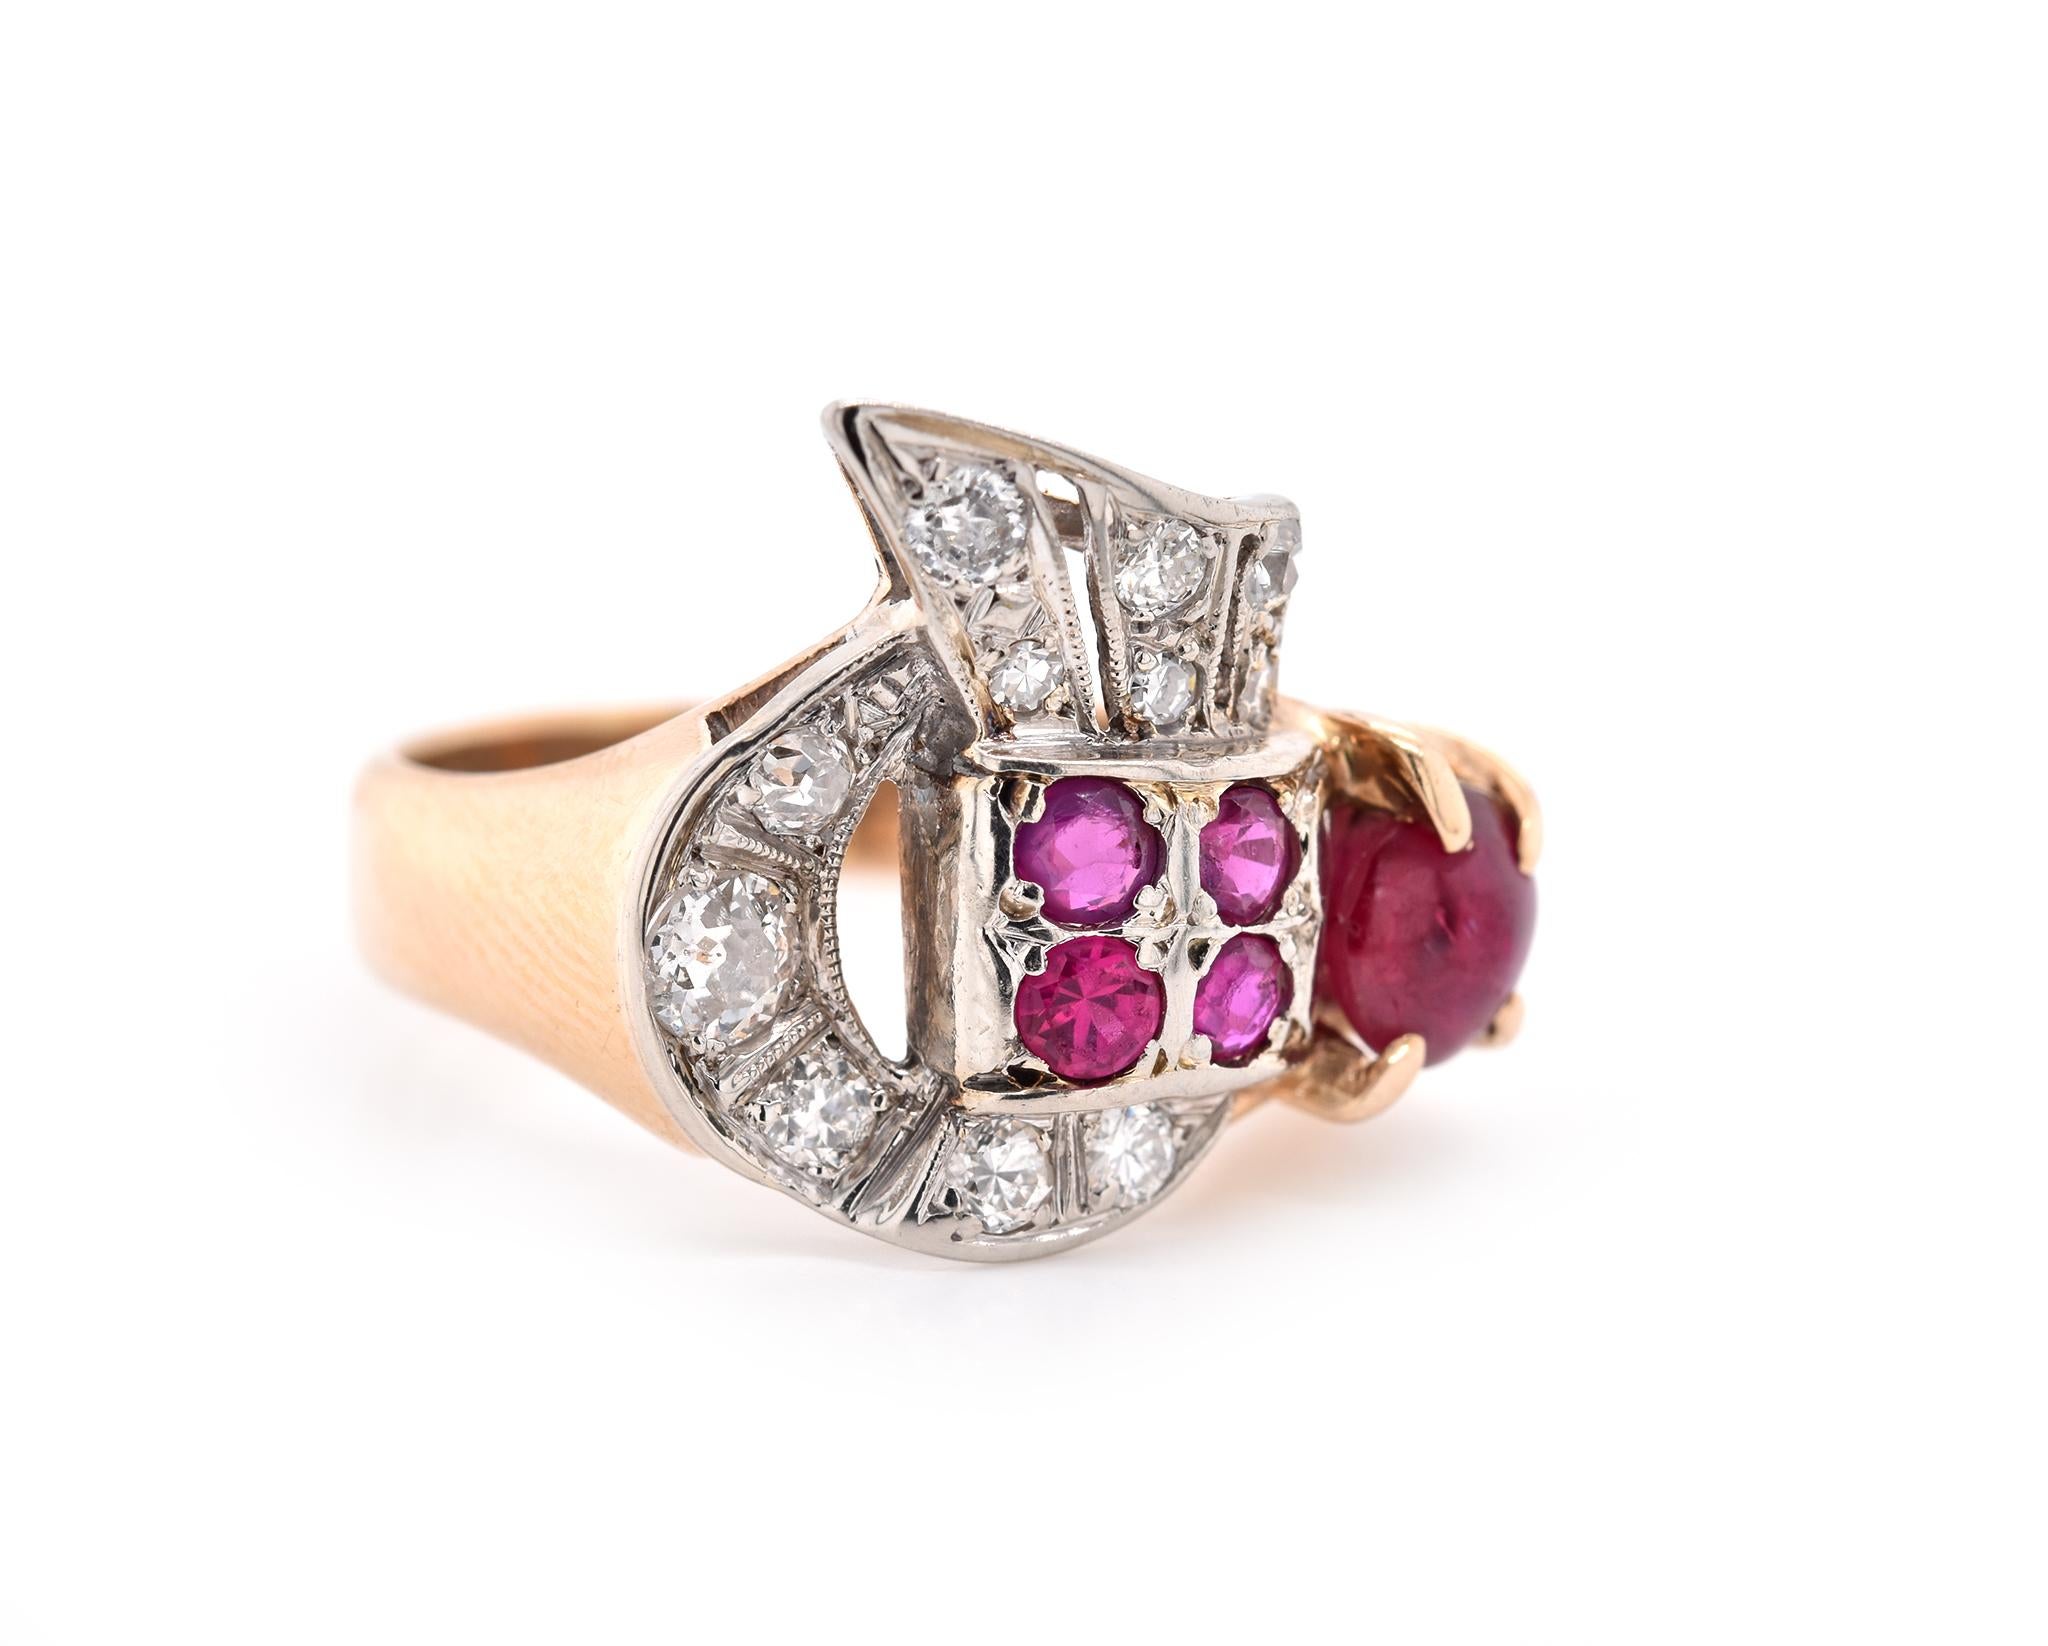 Designer: custom design
Material: 10 karat yellow gold
Diamonds: 11 round brilliant cut = .50cttw
Color: G
Clarity:  SI1-2
Gemstones: Ruby = 1.00cttw
Ring Size: 7.25 (please allow two additional shipping days for sizing requests)
Dimensions: ring